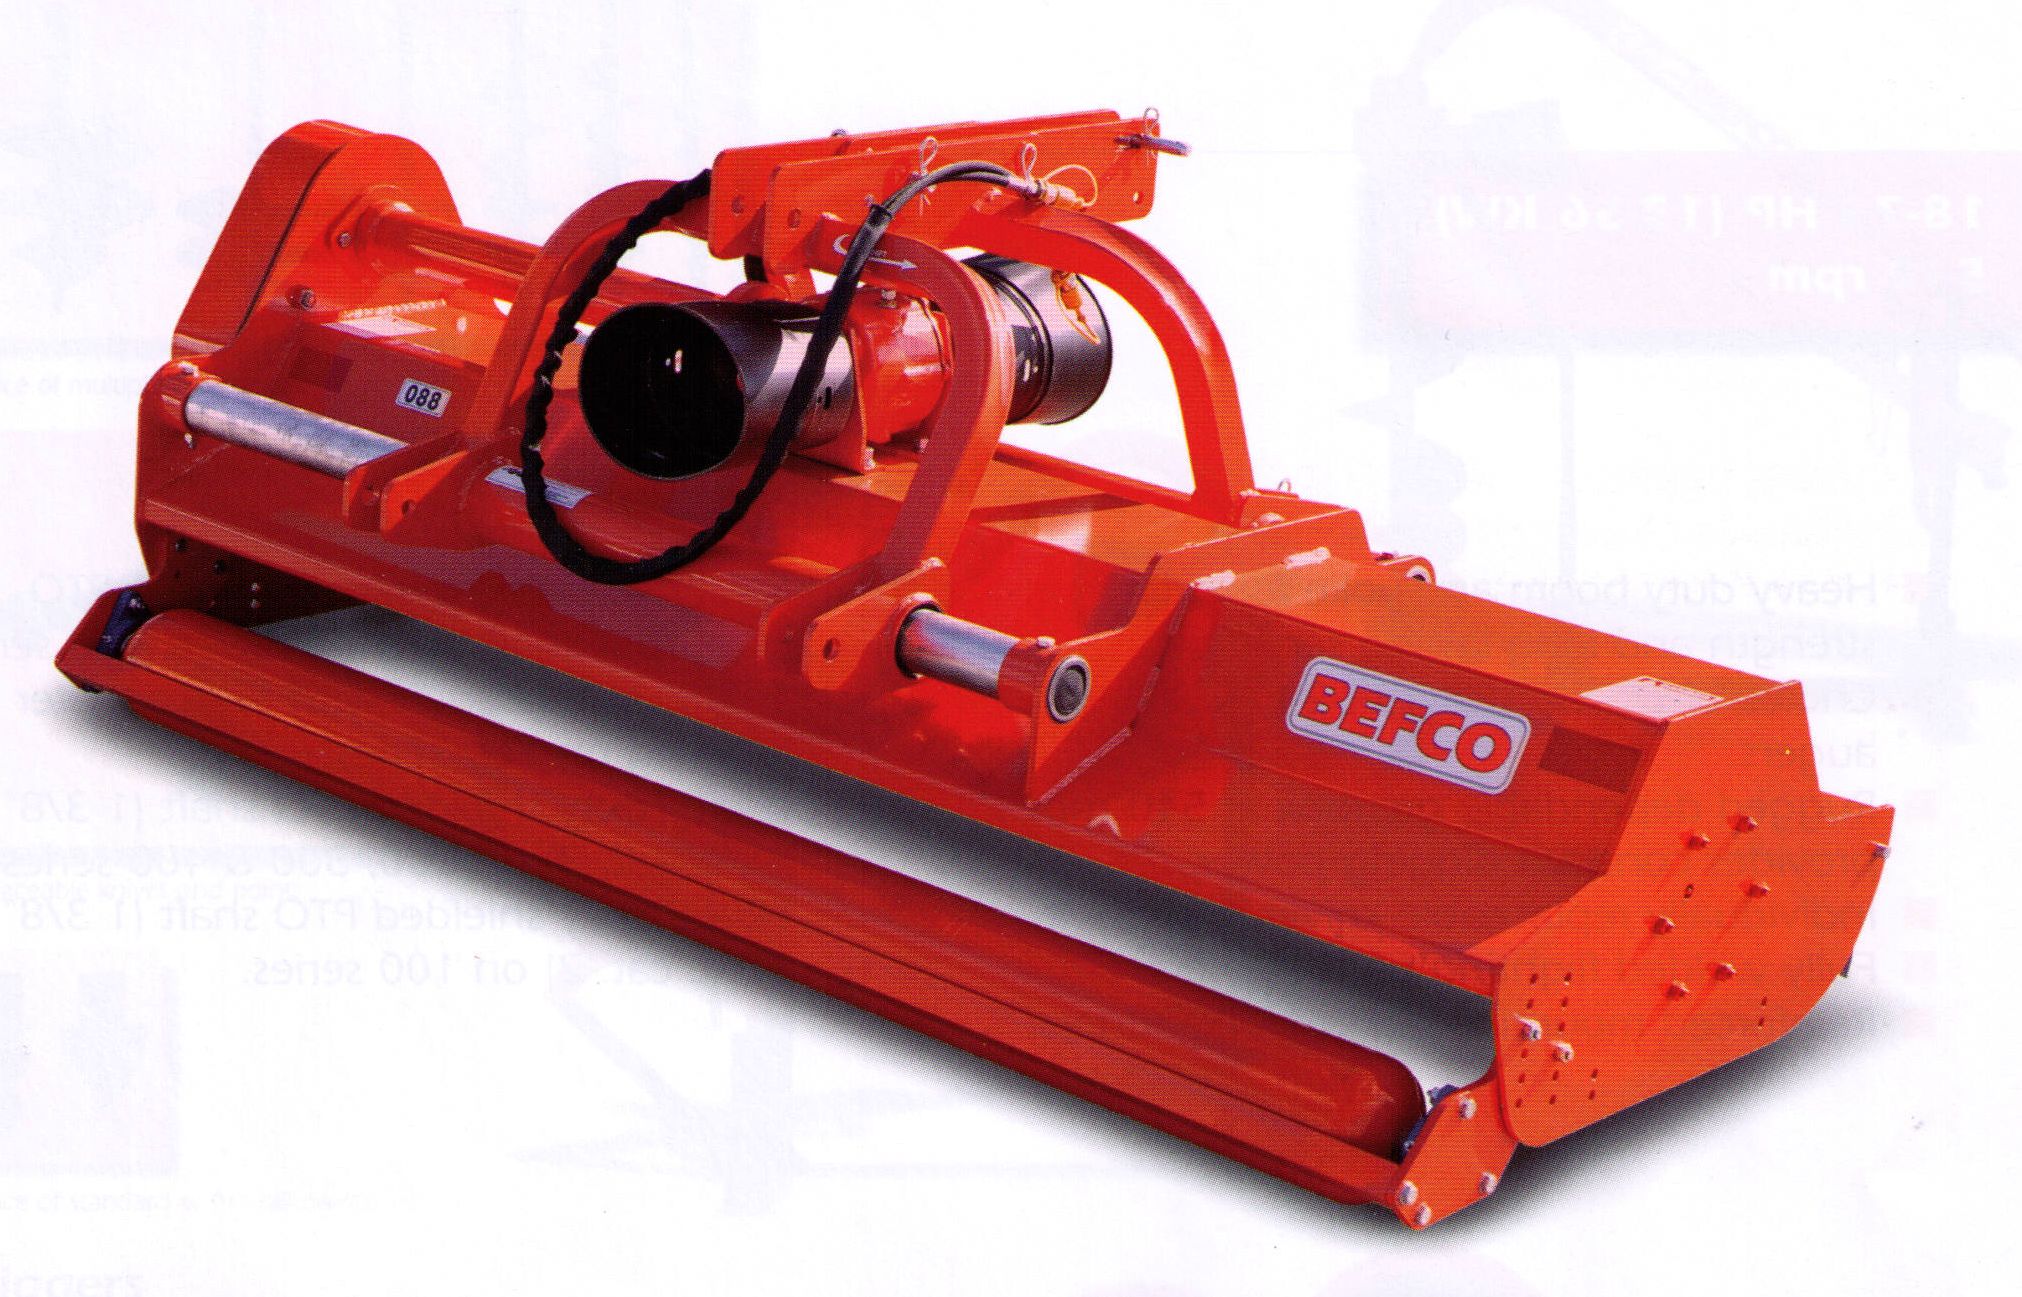 Has Hydraulic Side Shift, Can Be Center Mounted Or Shifted To Right Either 12 Or 16 Inches Depending Upon The Model